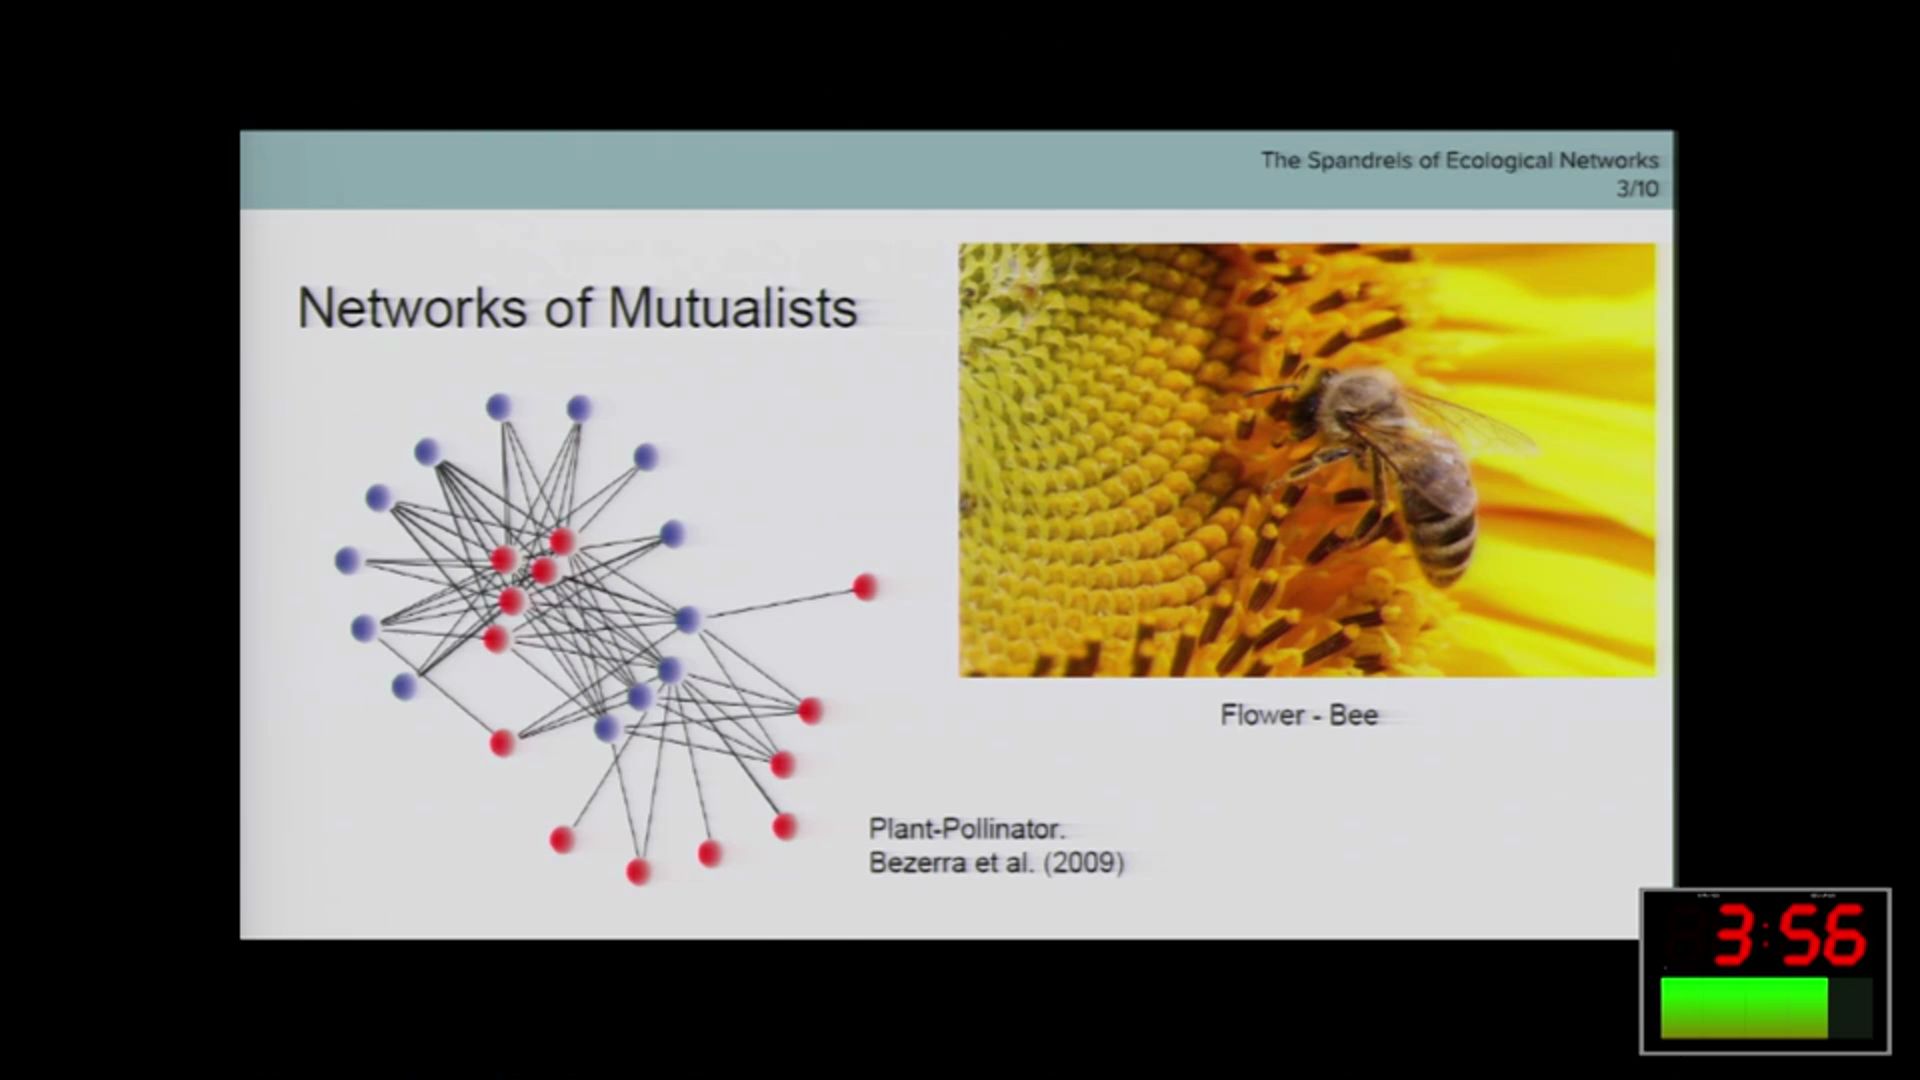 The spandrels of ecological networks